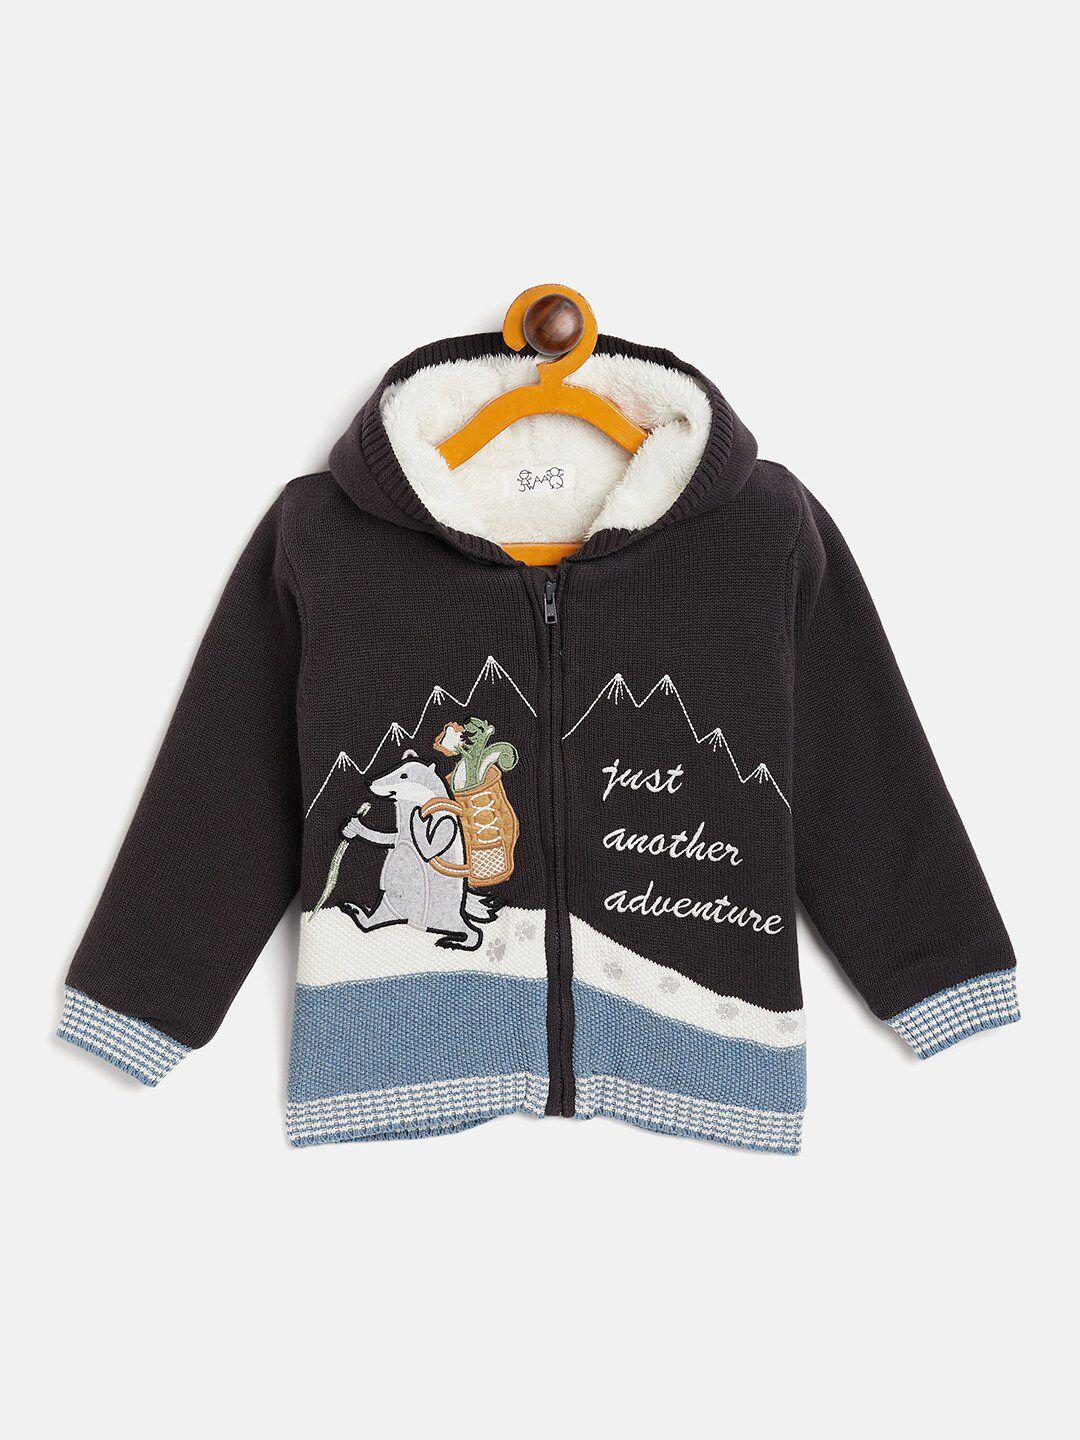 jwaaq-unisex-kids-quirky-printed-embroidered-hooded-cardigan-pure-cotton-sweater